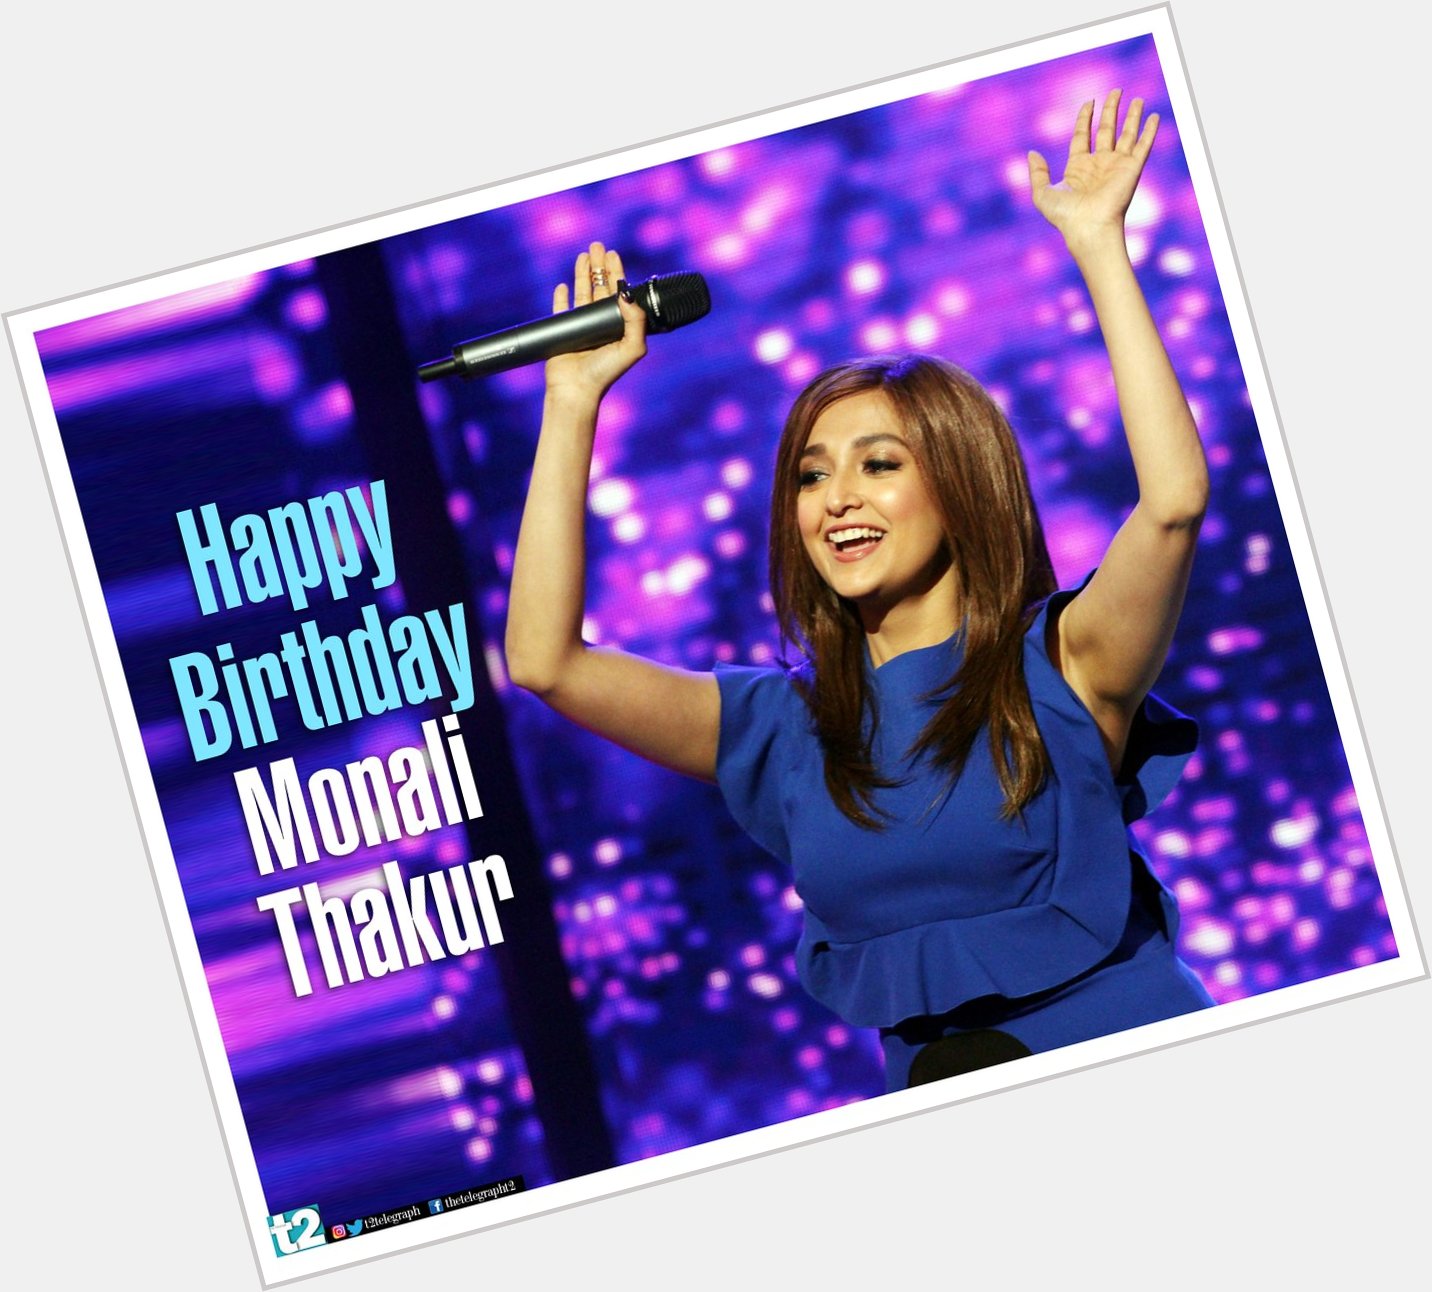 T2 wishes Monali Thakur, the Calcutta girl with a golden voice, a very happy birthday! 